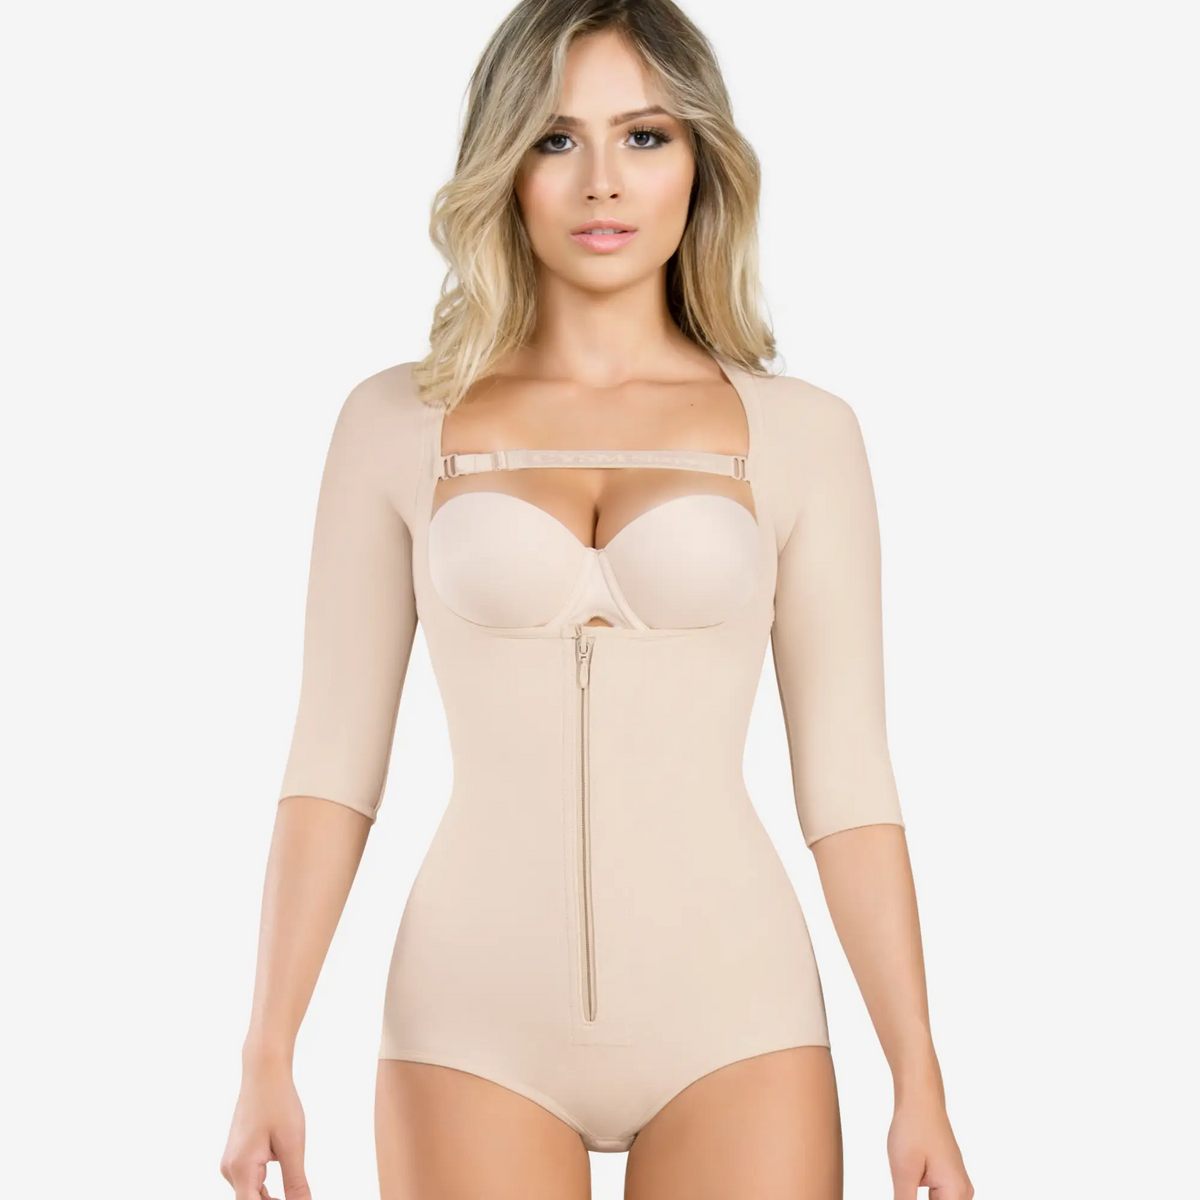 Arms and abdomen body shaper - Style 286